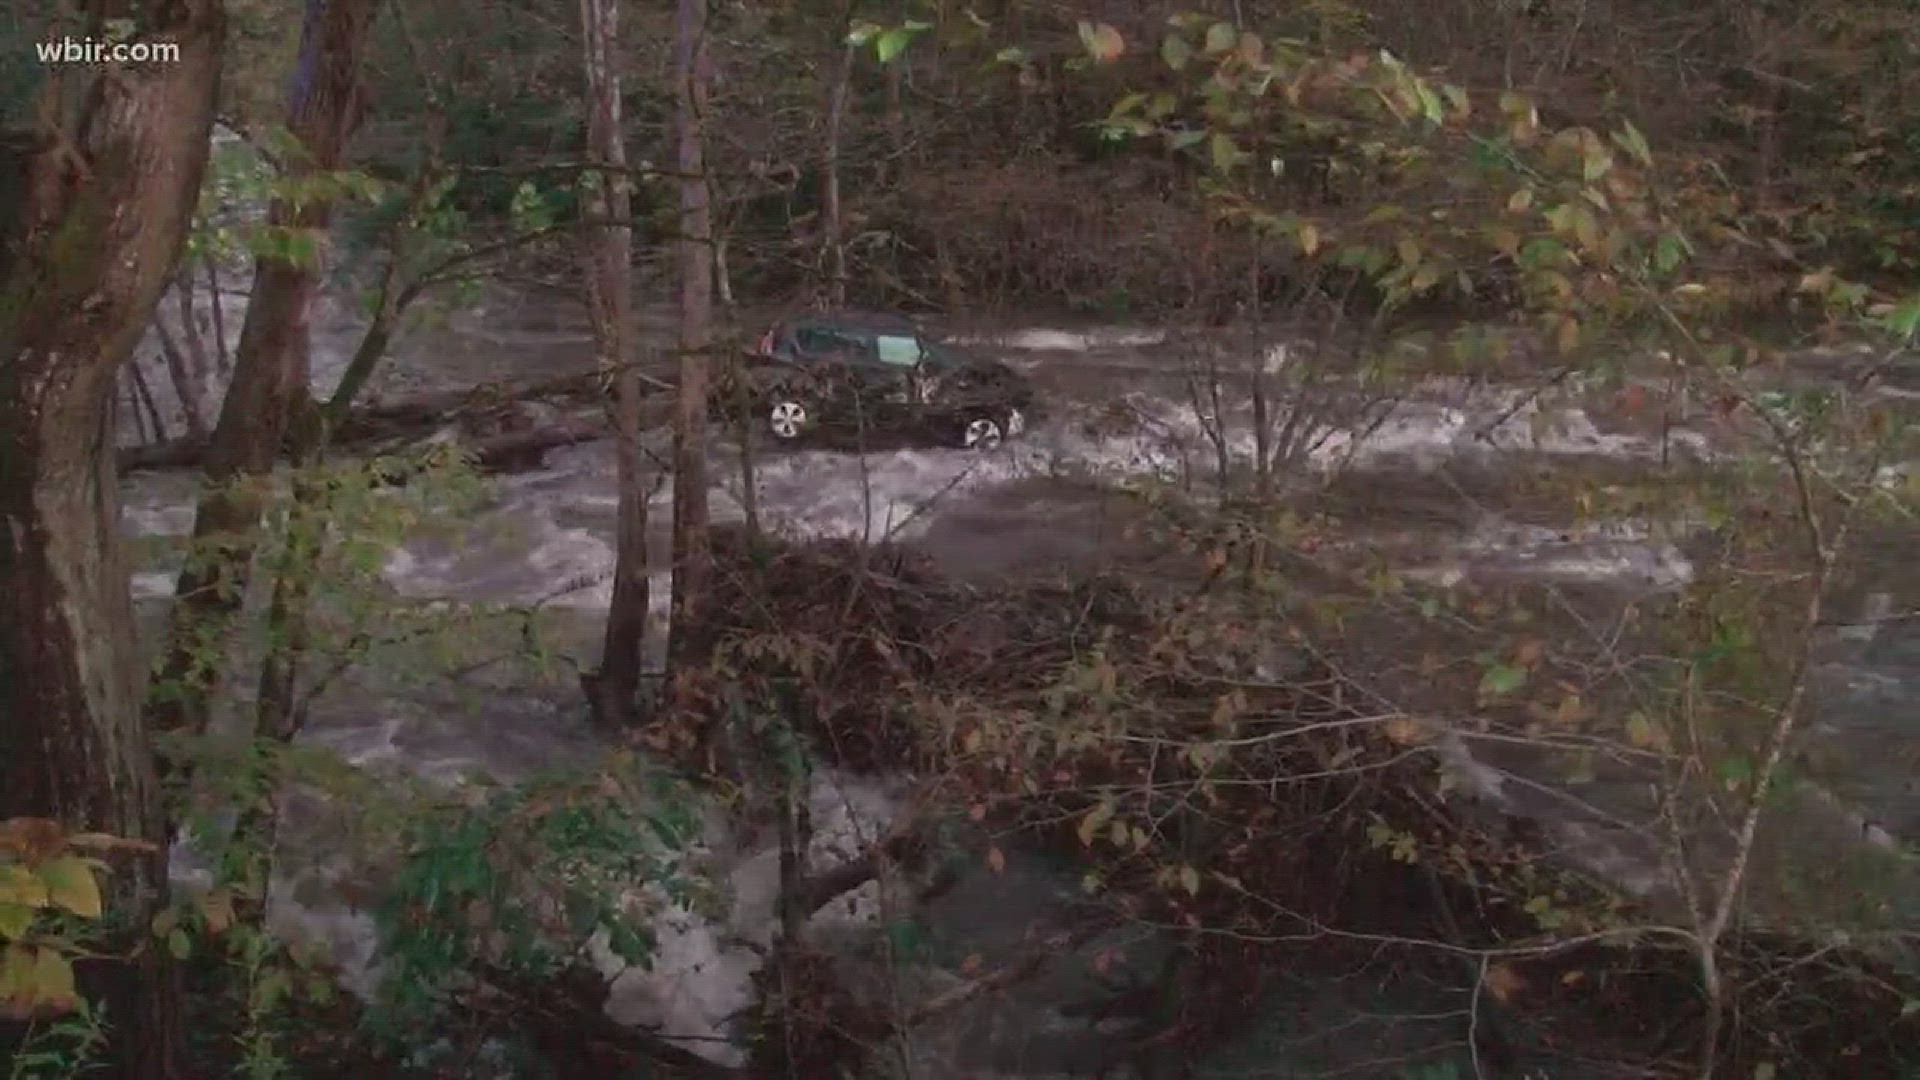 Oct. 23, 2017: A 19-year-old woman died after her car crashed into the Little Pigeon River.